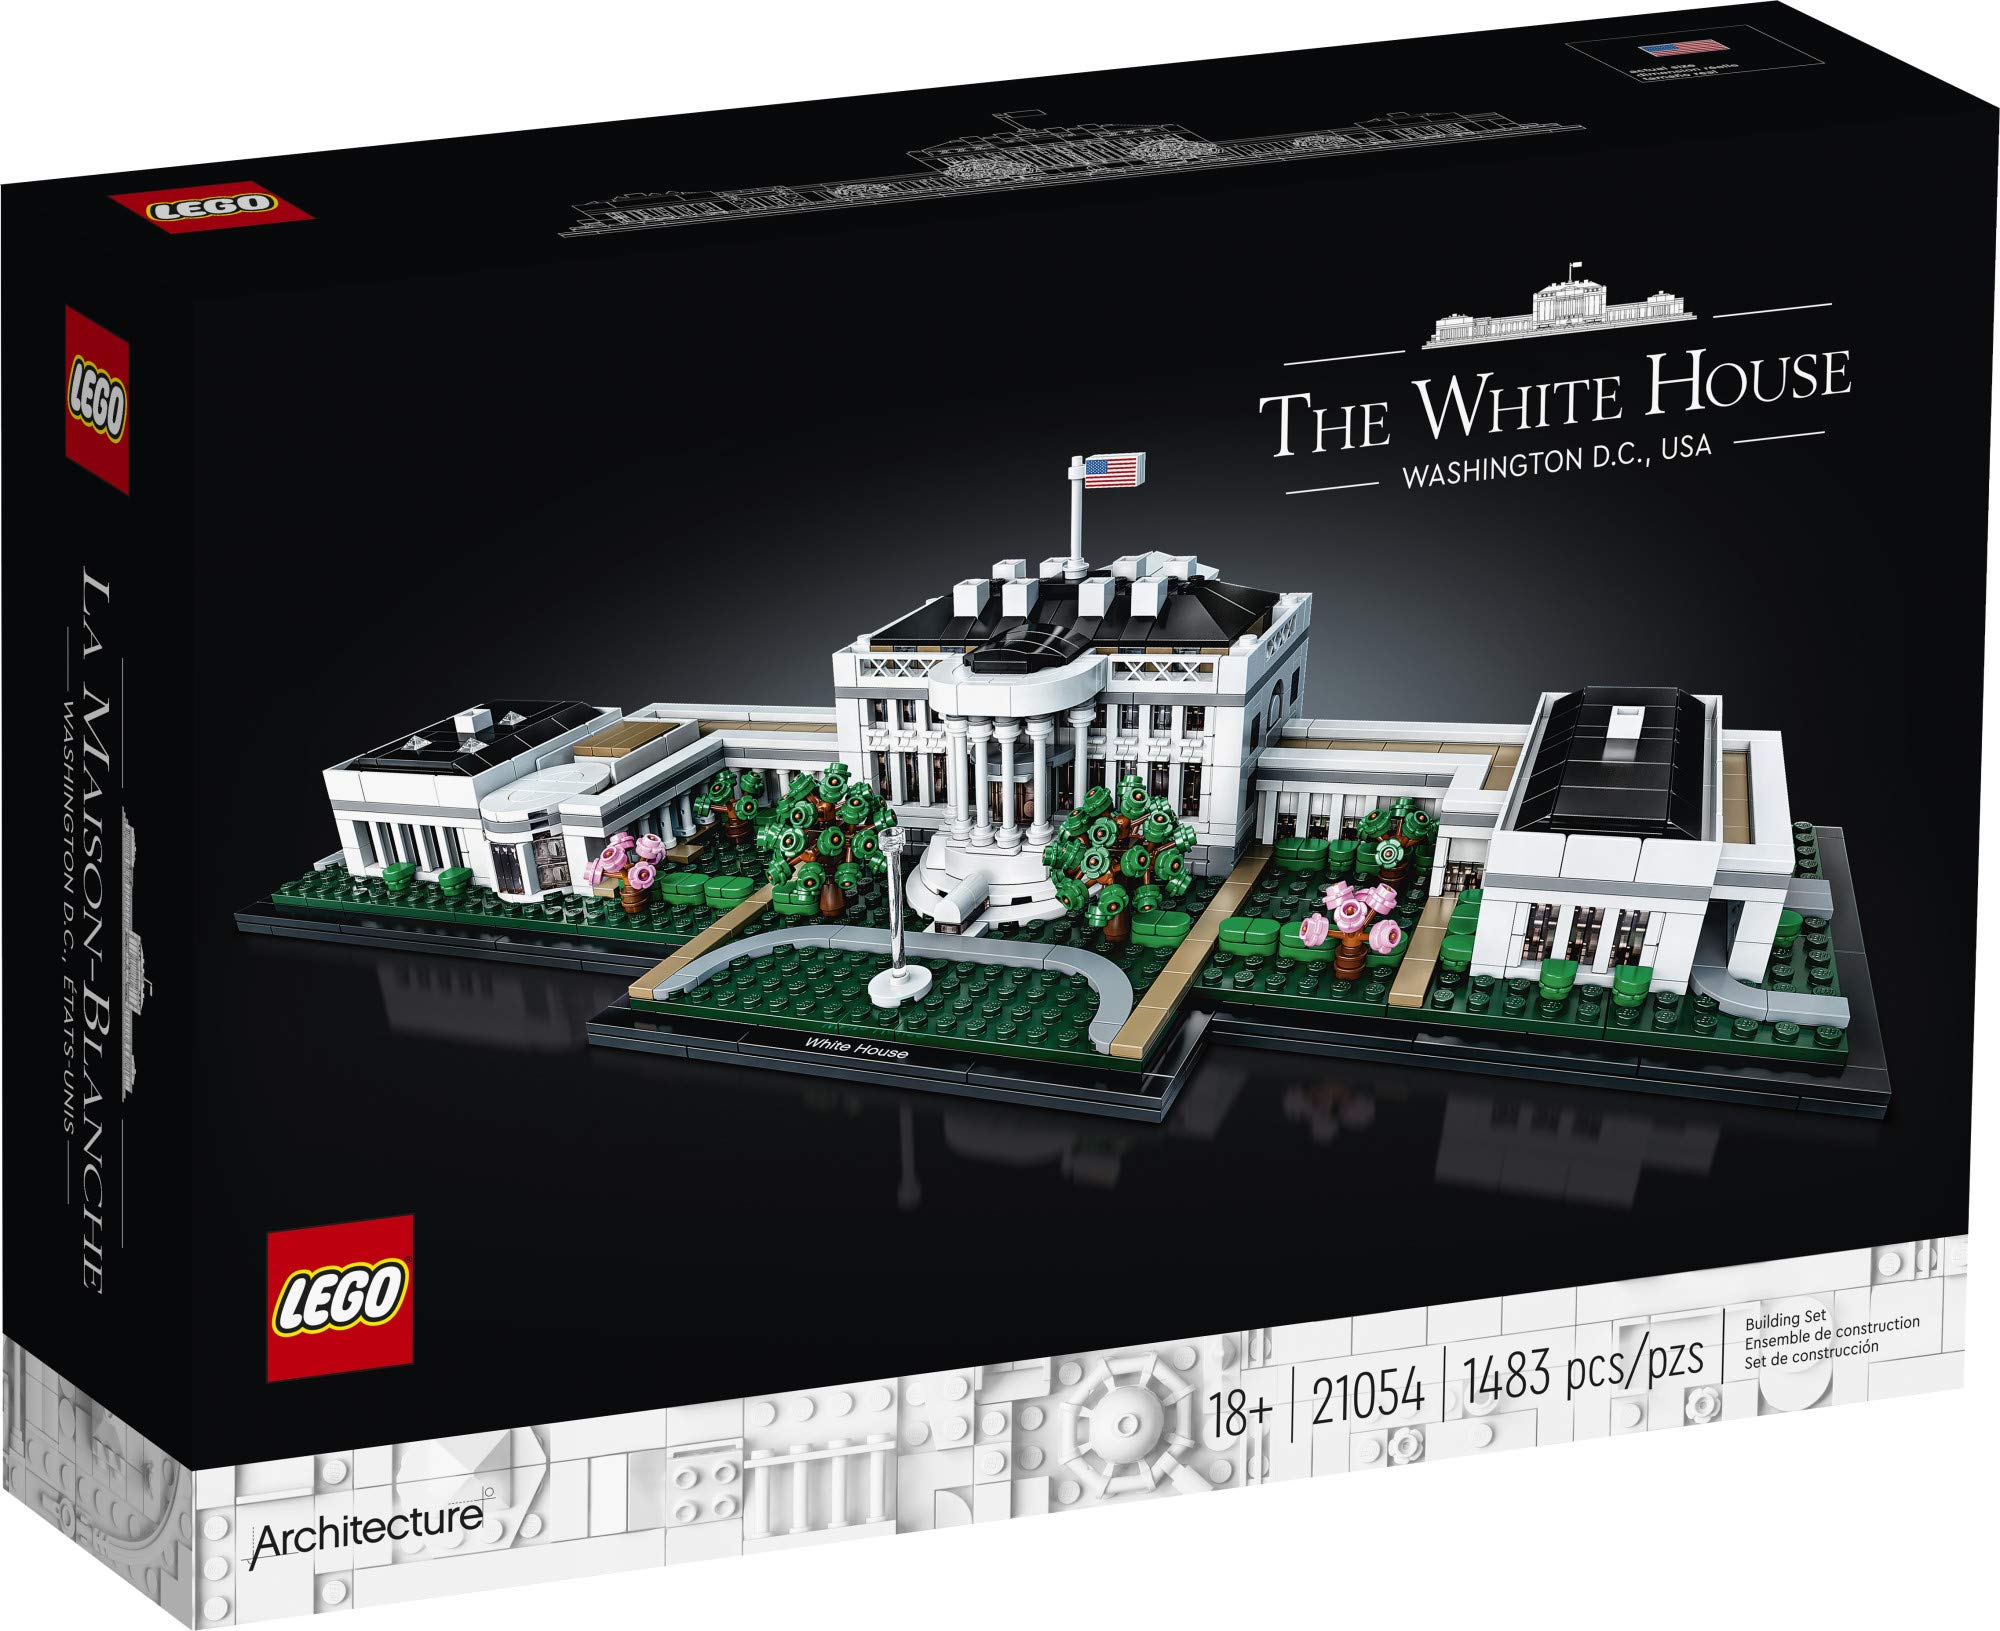 LEGO Architecture: The White House 21054 (Like New, Open Box)